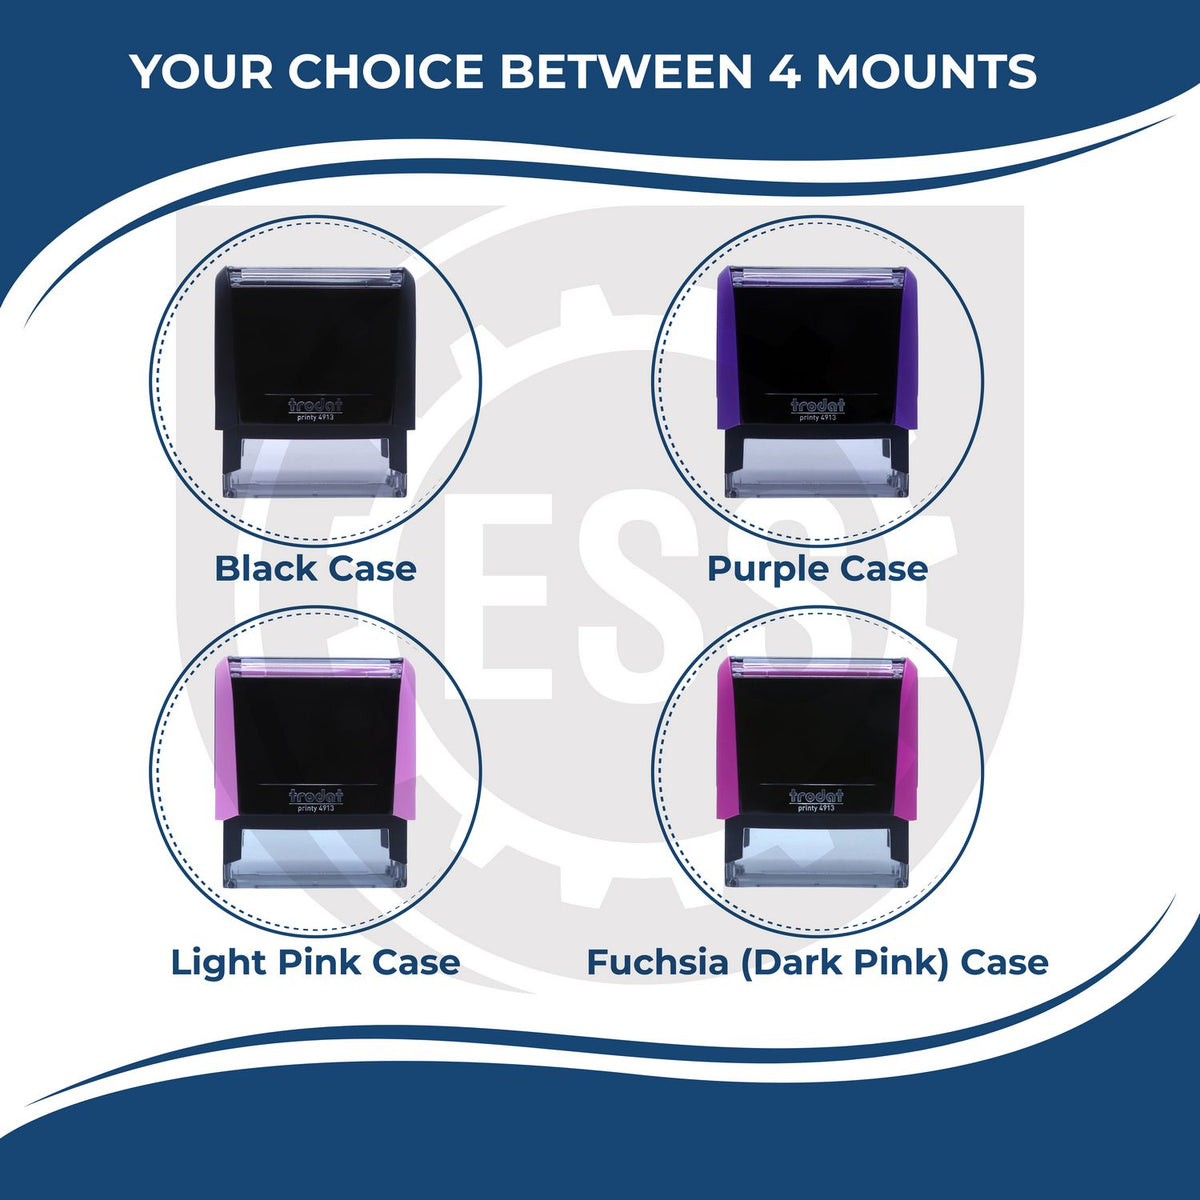 A picture of different colored mounts for the Self-Inking State Seal Vermont Notary Stamp featurning a Red, Blue or Black Mount